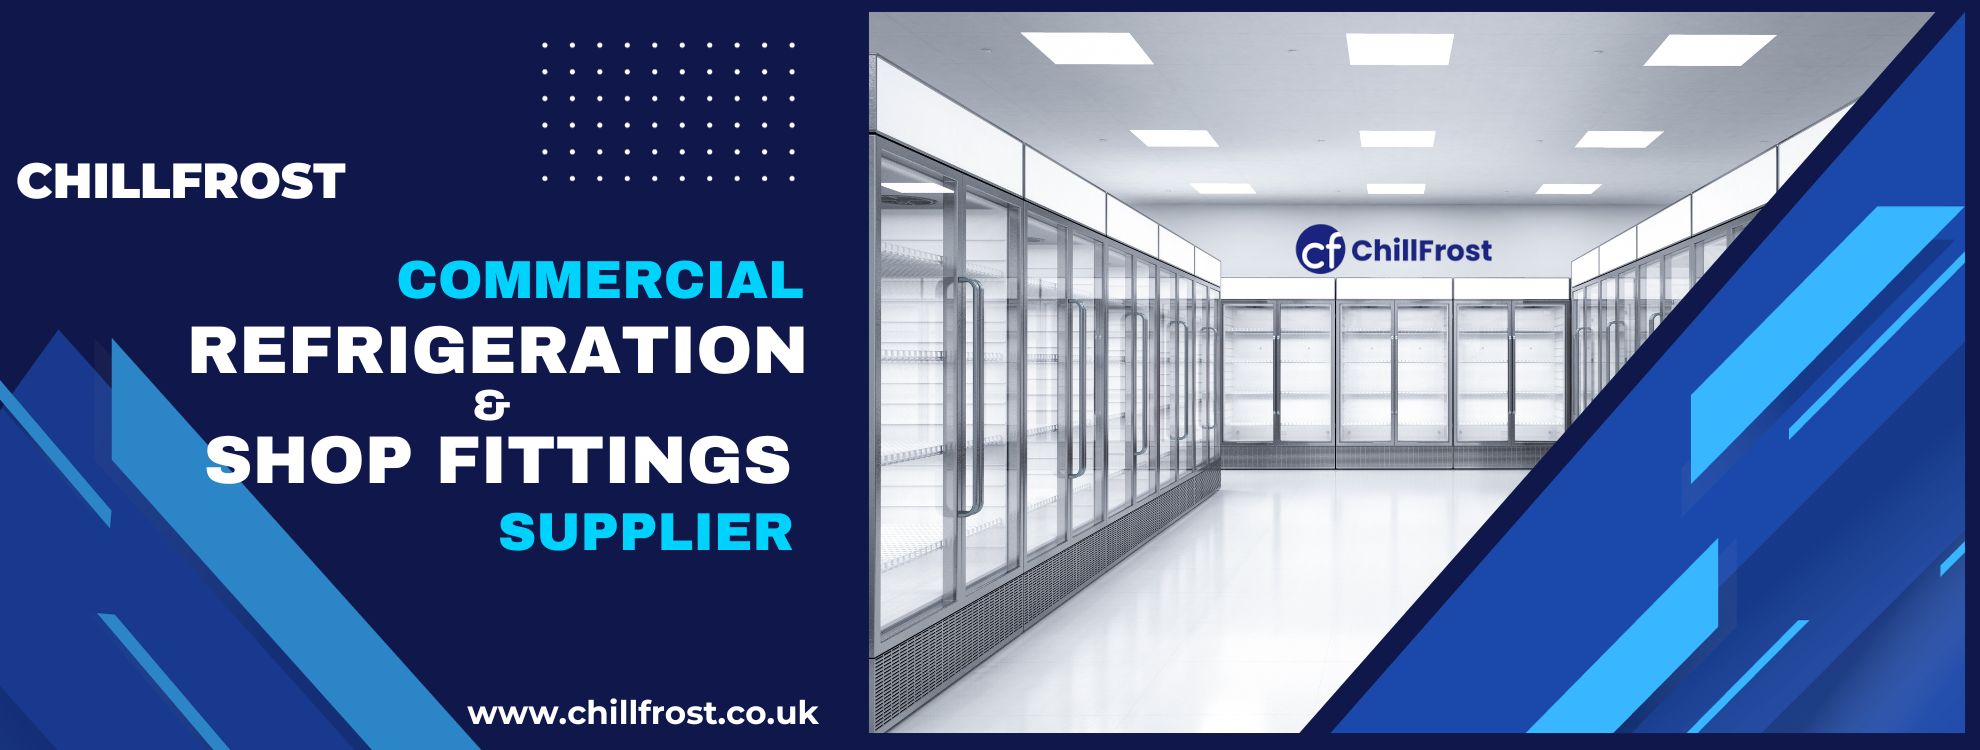 Commercial Refrigeration & Shop Fittings